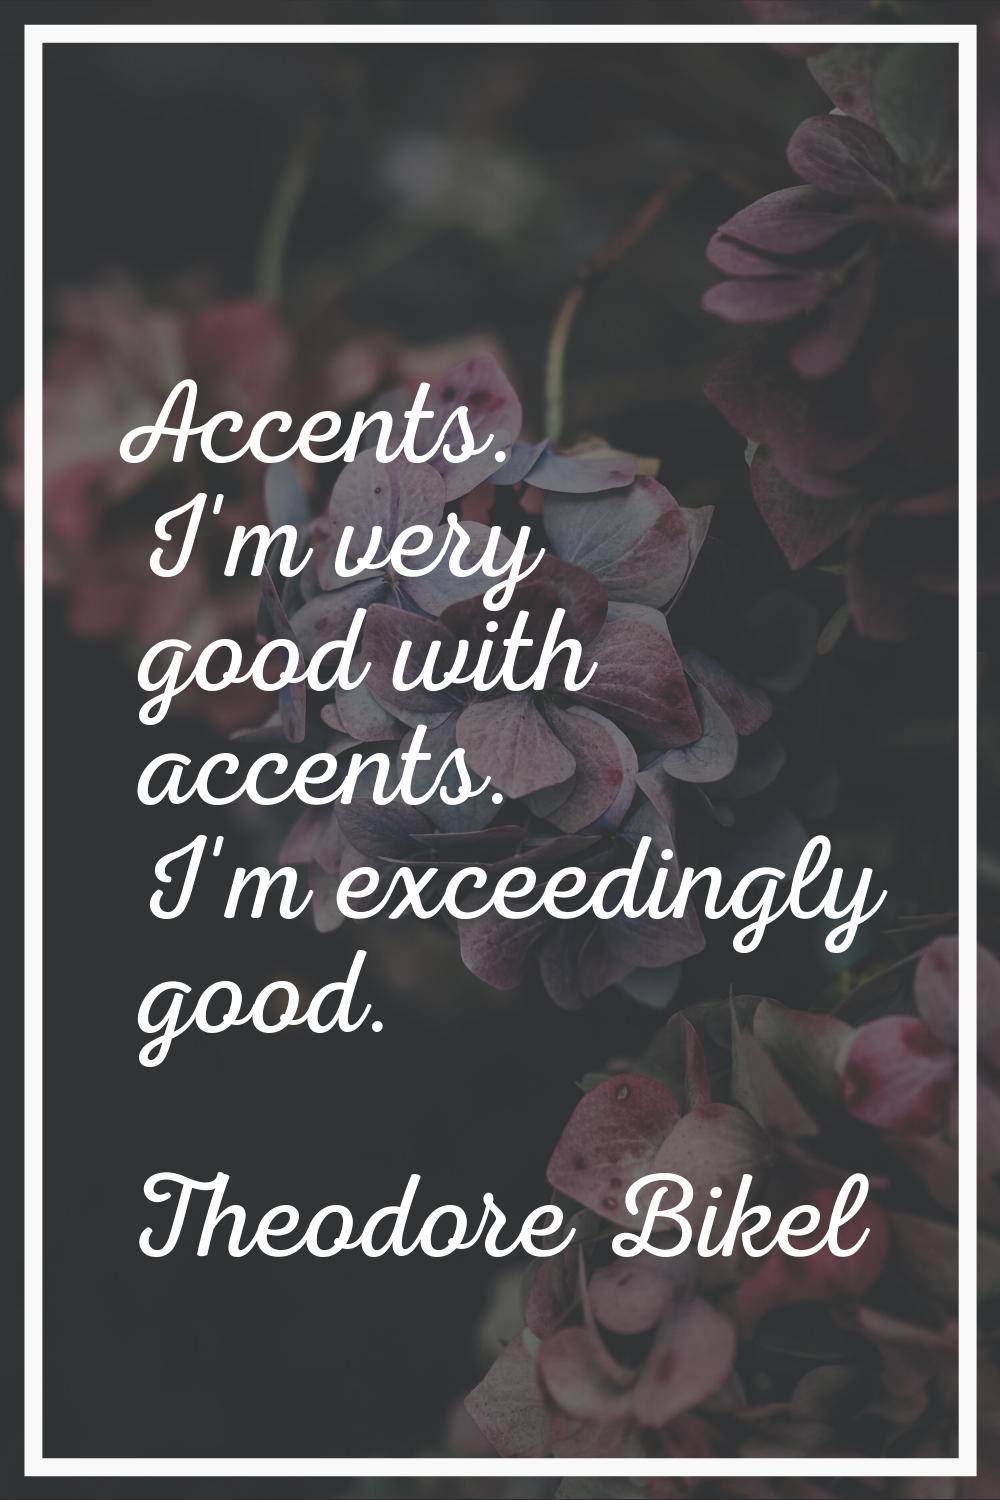 Accents. I'm very good with accents. I'm exceedingly good.